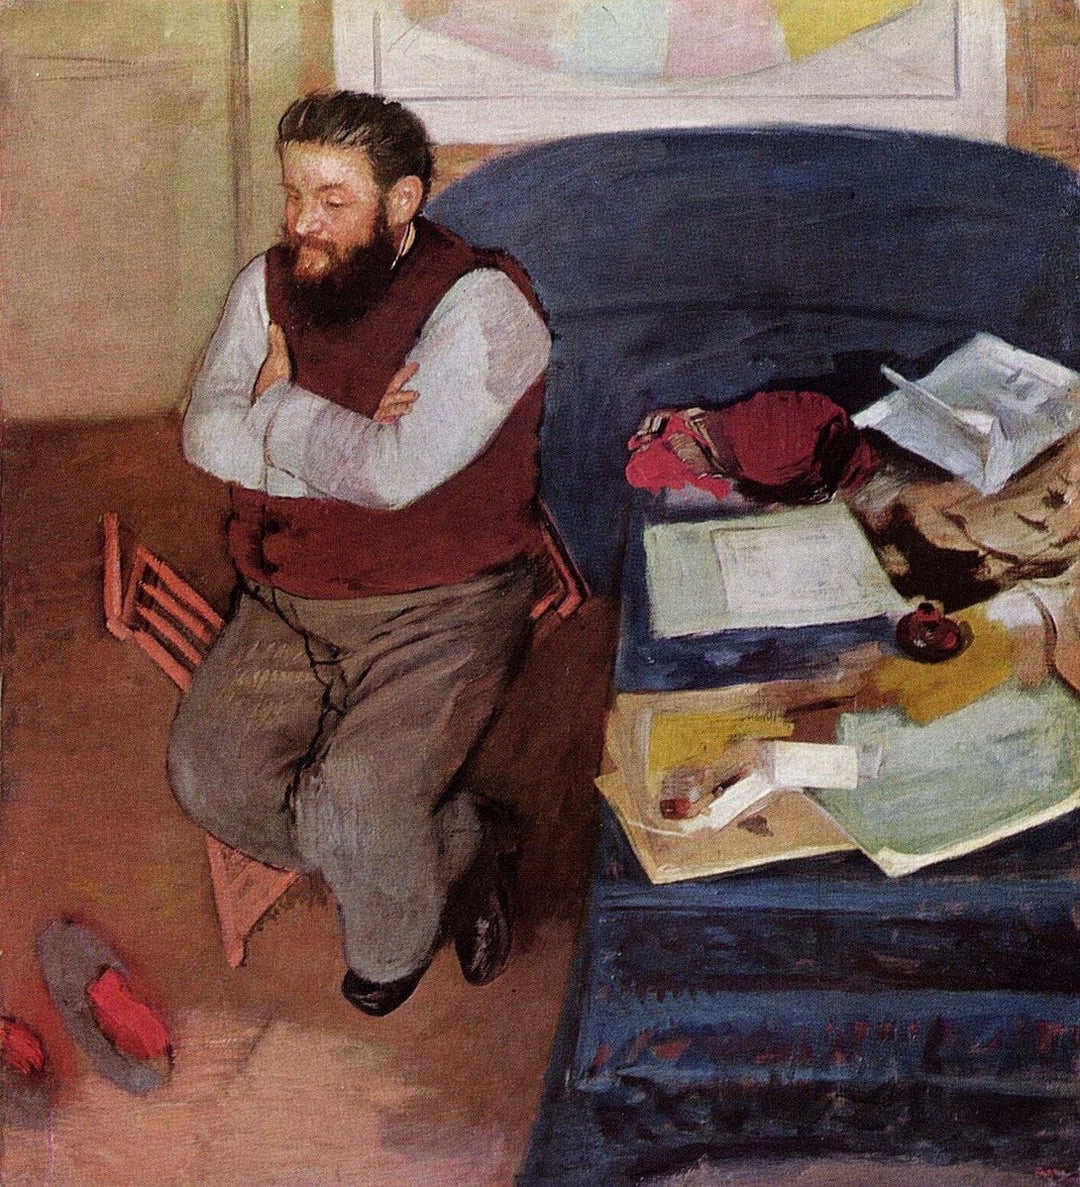 Diego Martelli (1839 - 1896) Painting by Edgar Degas Reproduction Oil on Canvas